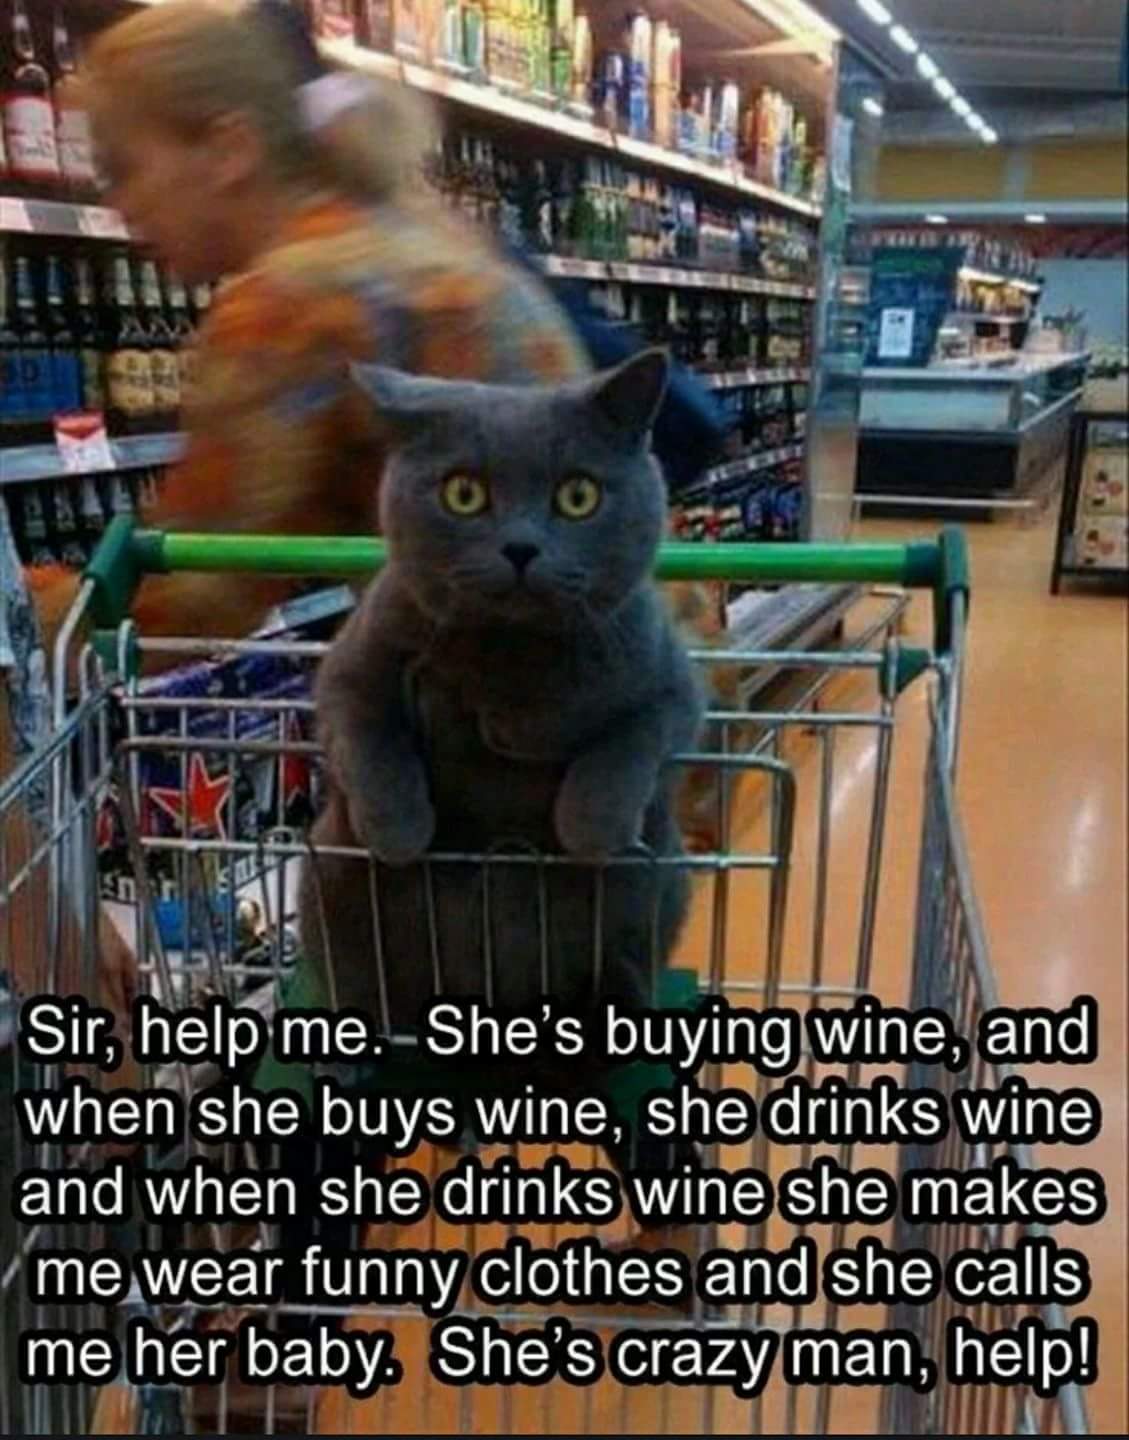 sir help me she's buying wine - Sir, help me. She's buying wine, and when she buys wine, she drinks wine and when she drinks wine she makes me wear funny clothes and she calls me her baby. She's crazy man, help! Limiteti